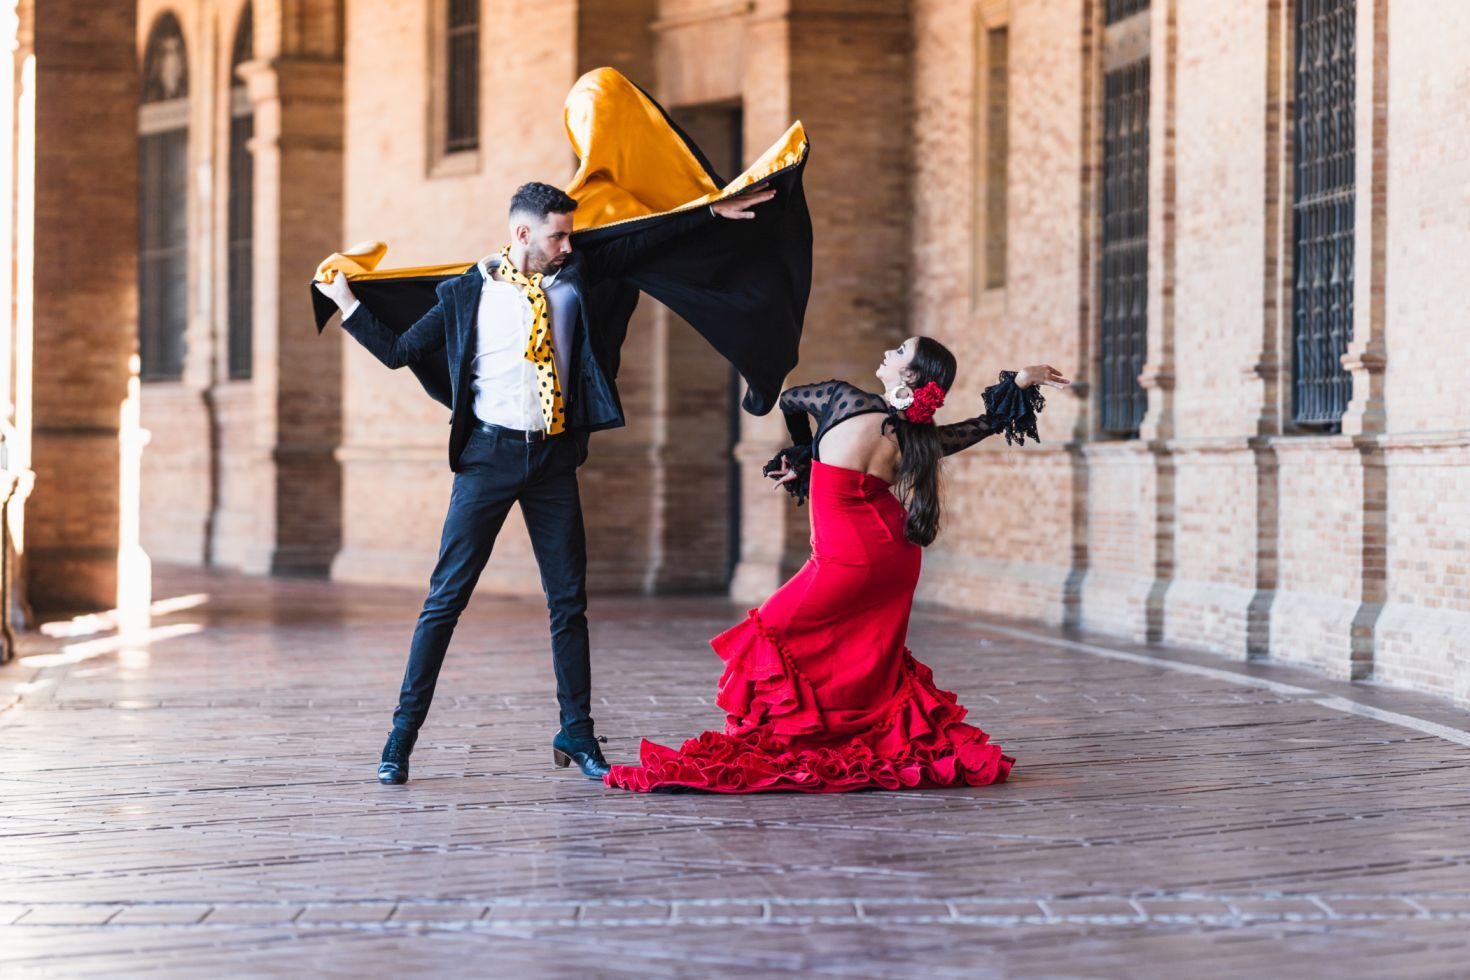 Man and woman in flamenco costume performing a dance outdoors